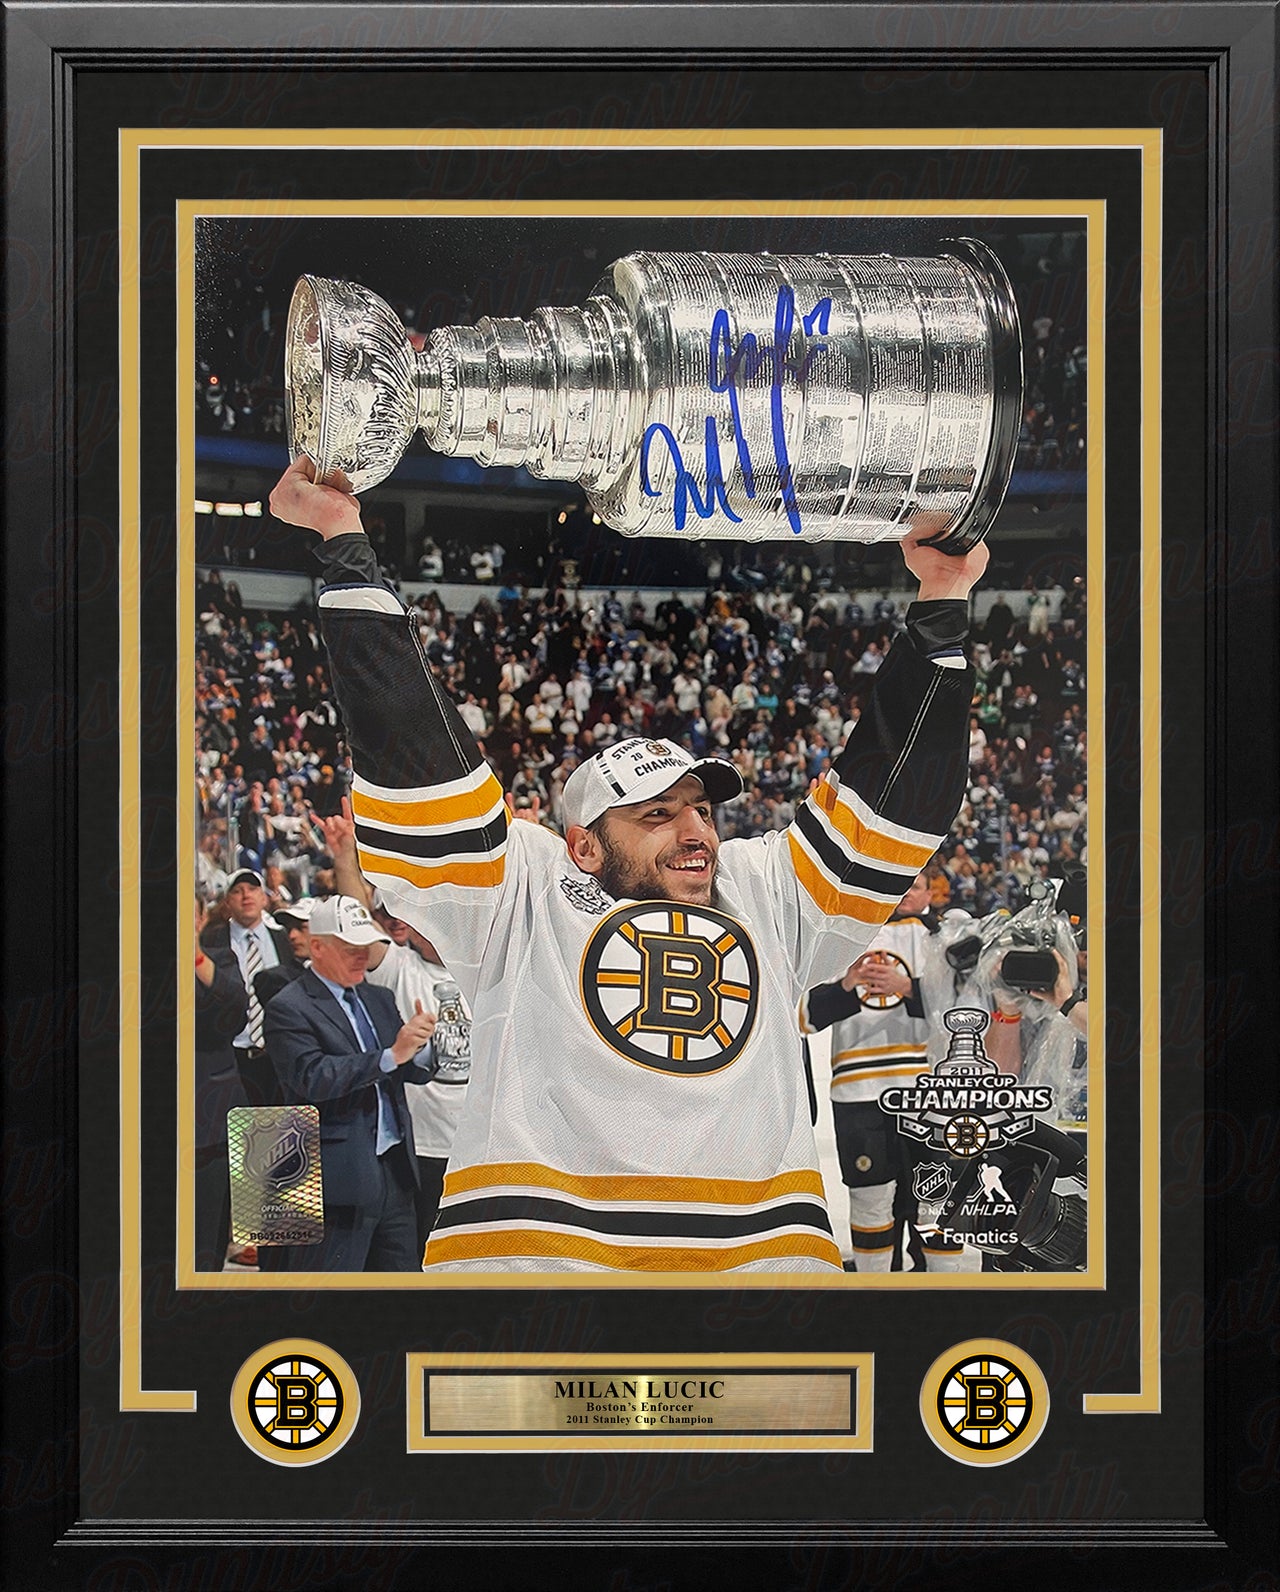 Milan Lucic 2011 Stanley Cup Boston Bruins Autographed 11" x 14" Framed Hockey Photo